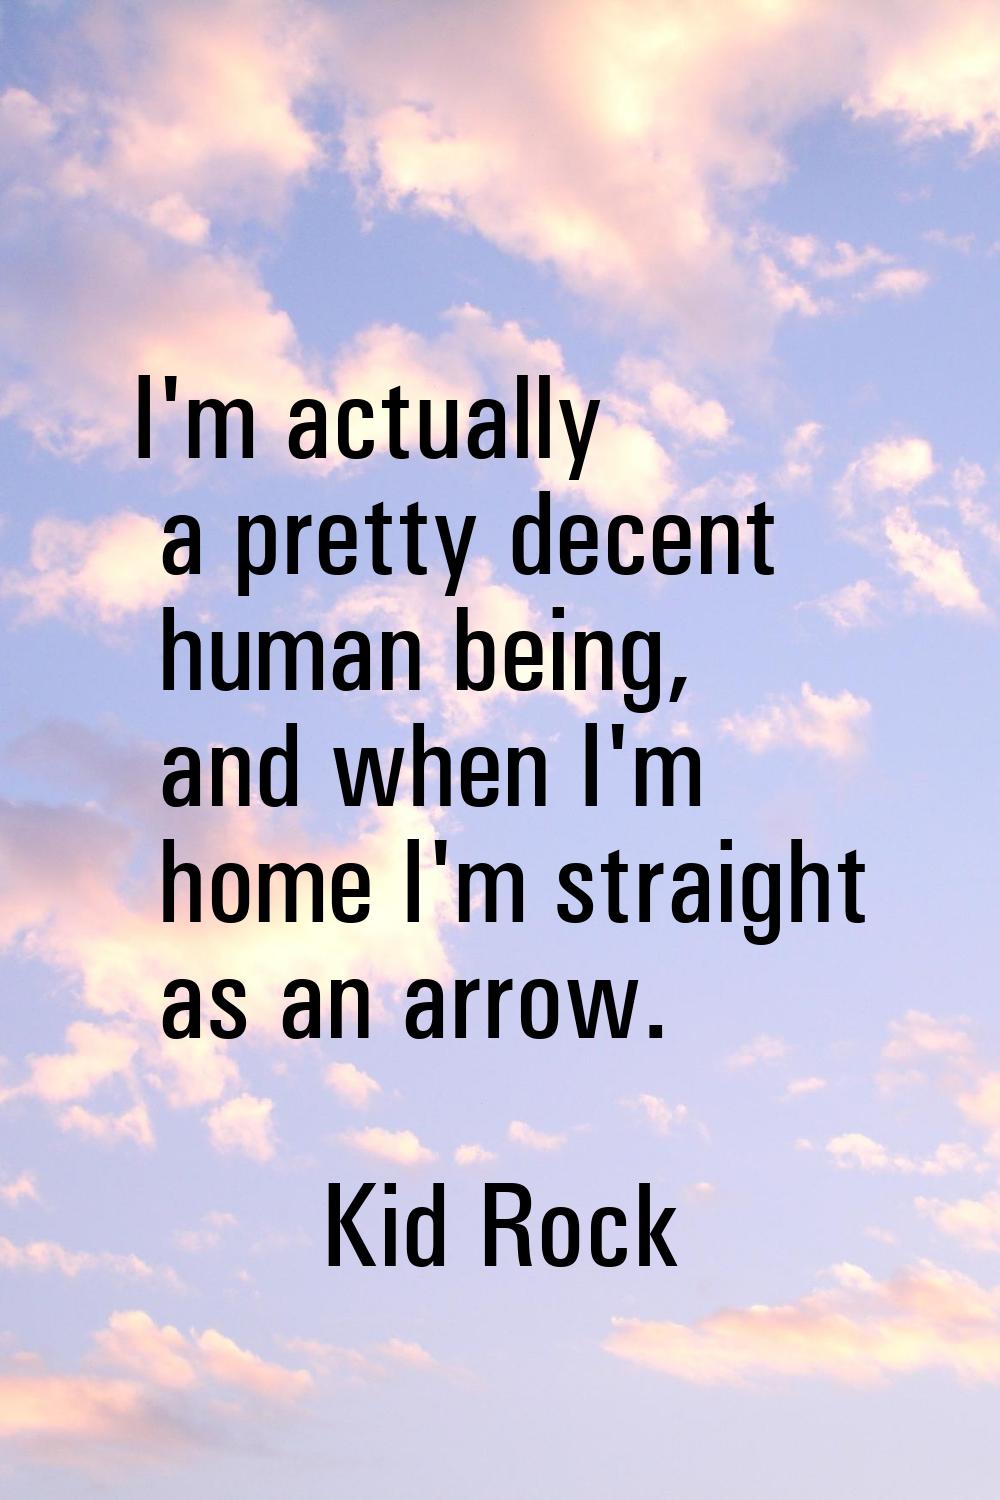 I'm actually a pretty decent human being, and when I'm home I'm straight as an arrow.